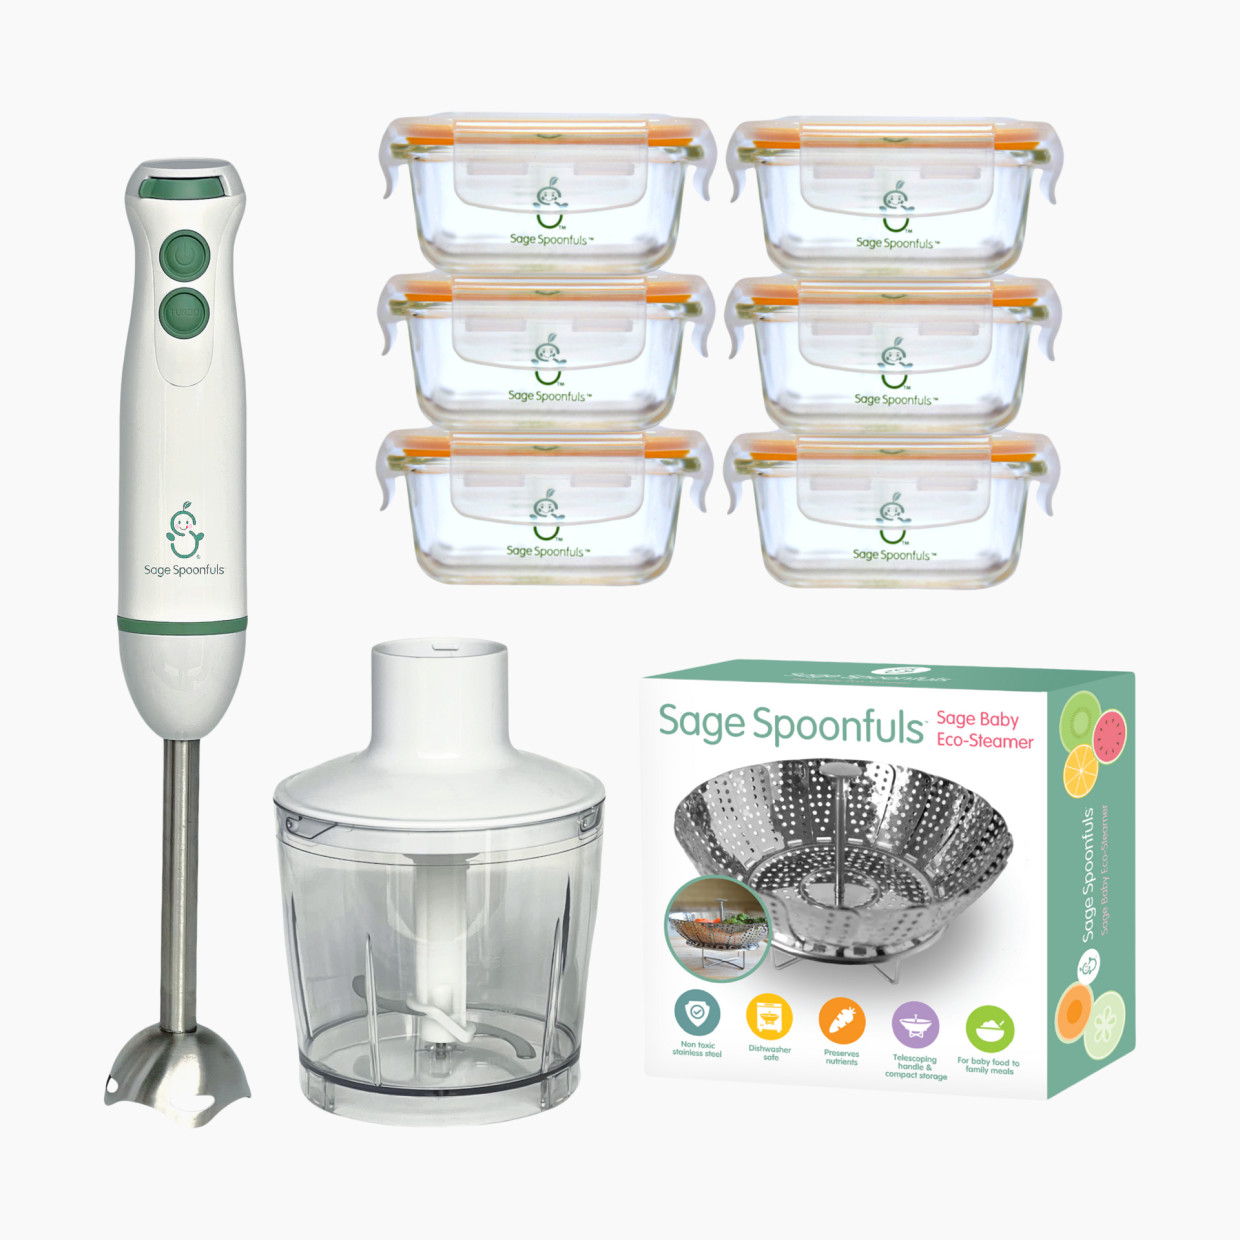 Sage Spoonfuls Baby Food Maker Set with Tough Glass Jars - 10 Piece.